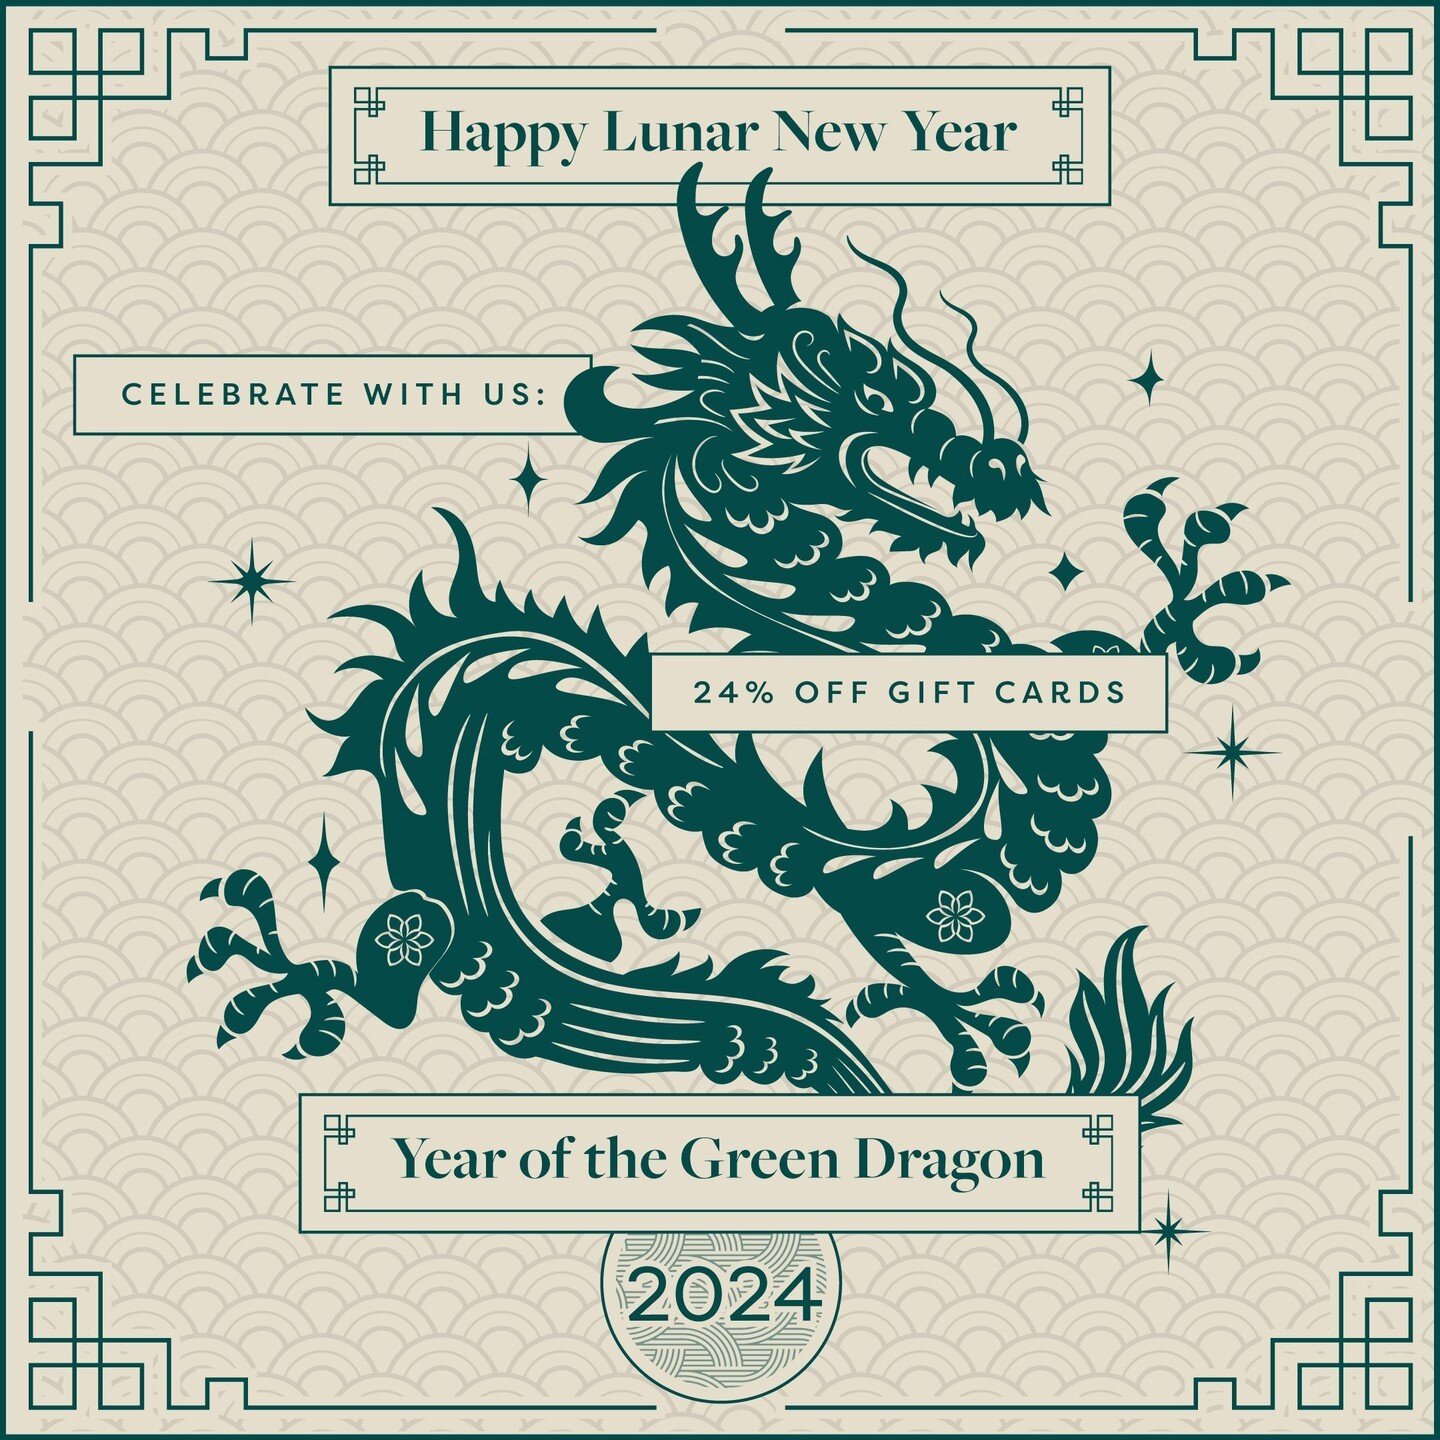 Offer ends TOMORROW! ⁠
GET 24% OFF RITUAL GIFT CARDS⁠
Gift the energy and beauty of the Green Dragon to yourself or a loved one! 🐲 Use code DRAGON24 at the gift cards link in bio.⁠
⁠
Celebrating the Year of the Dragon 🐲🐉⁠
Representing change, new 